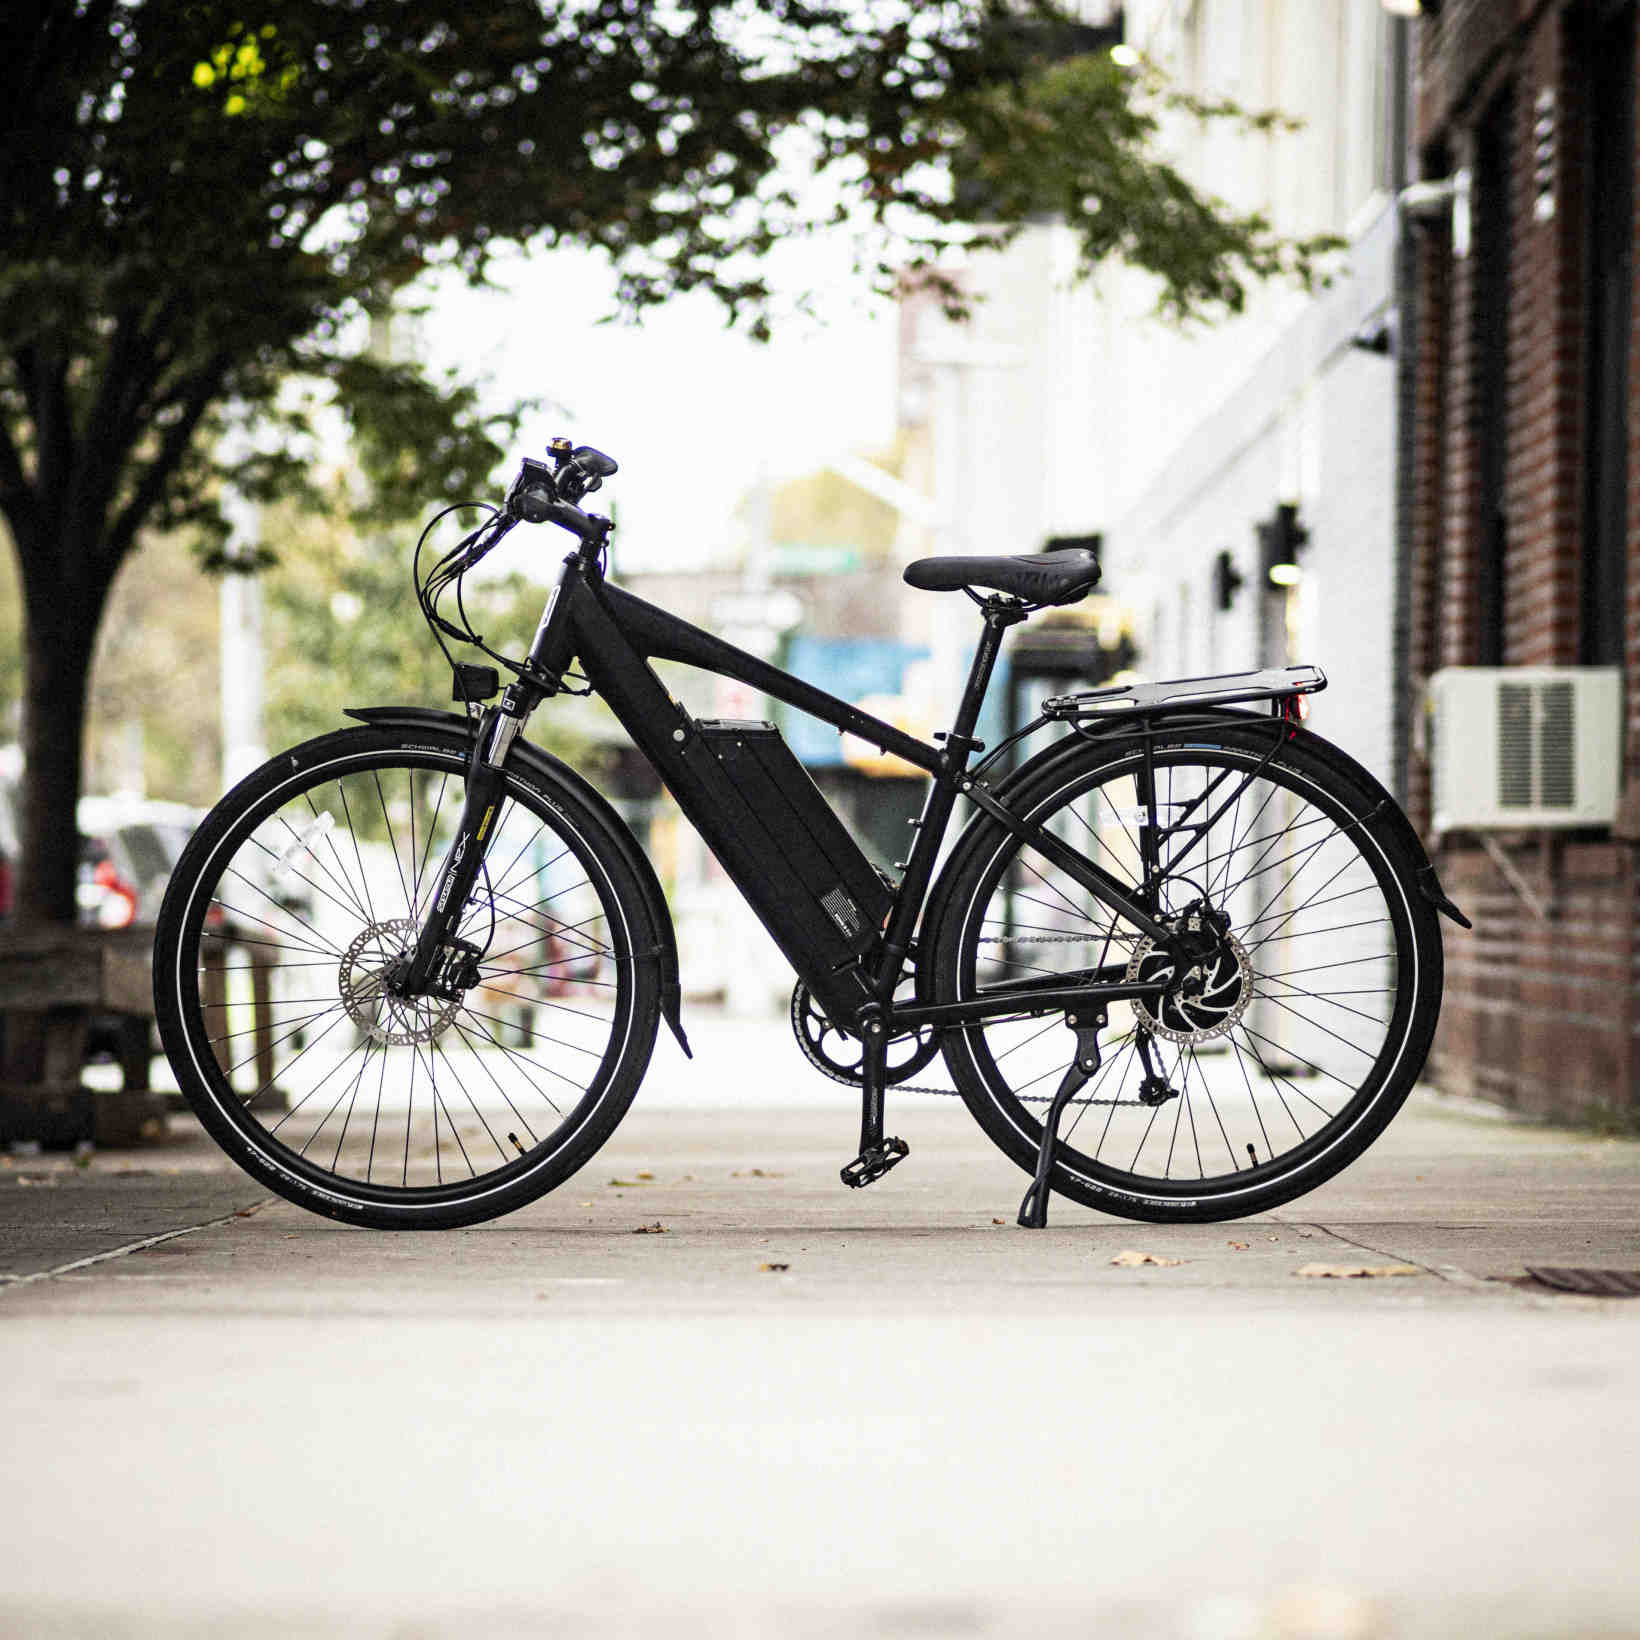 How can I increase the power of my electric bike?